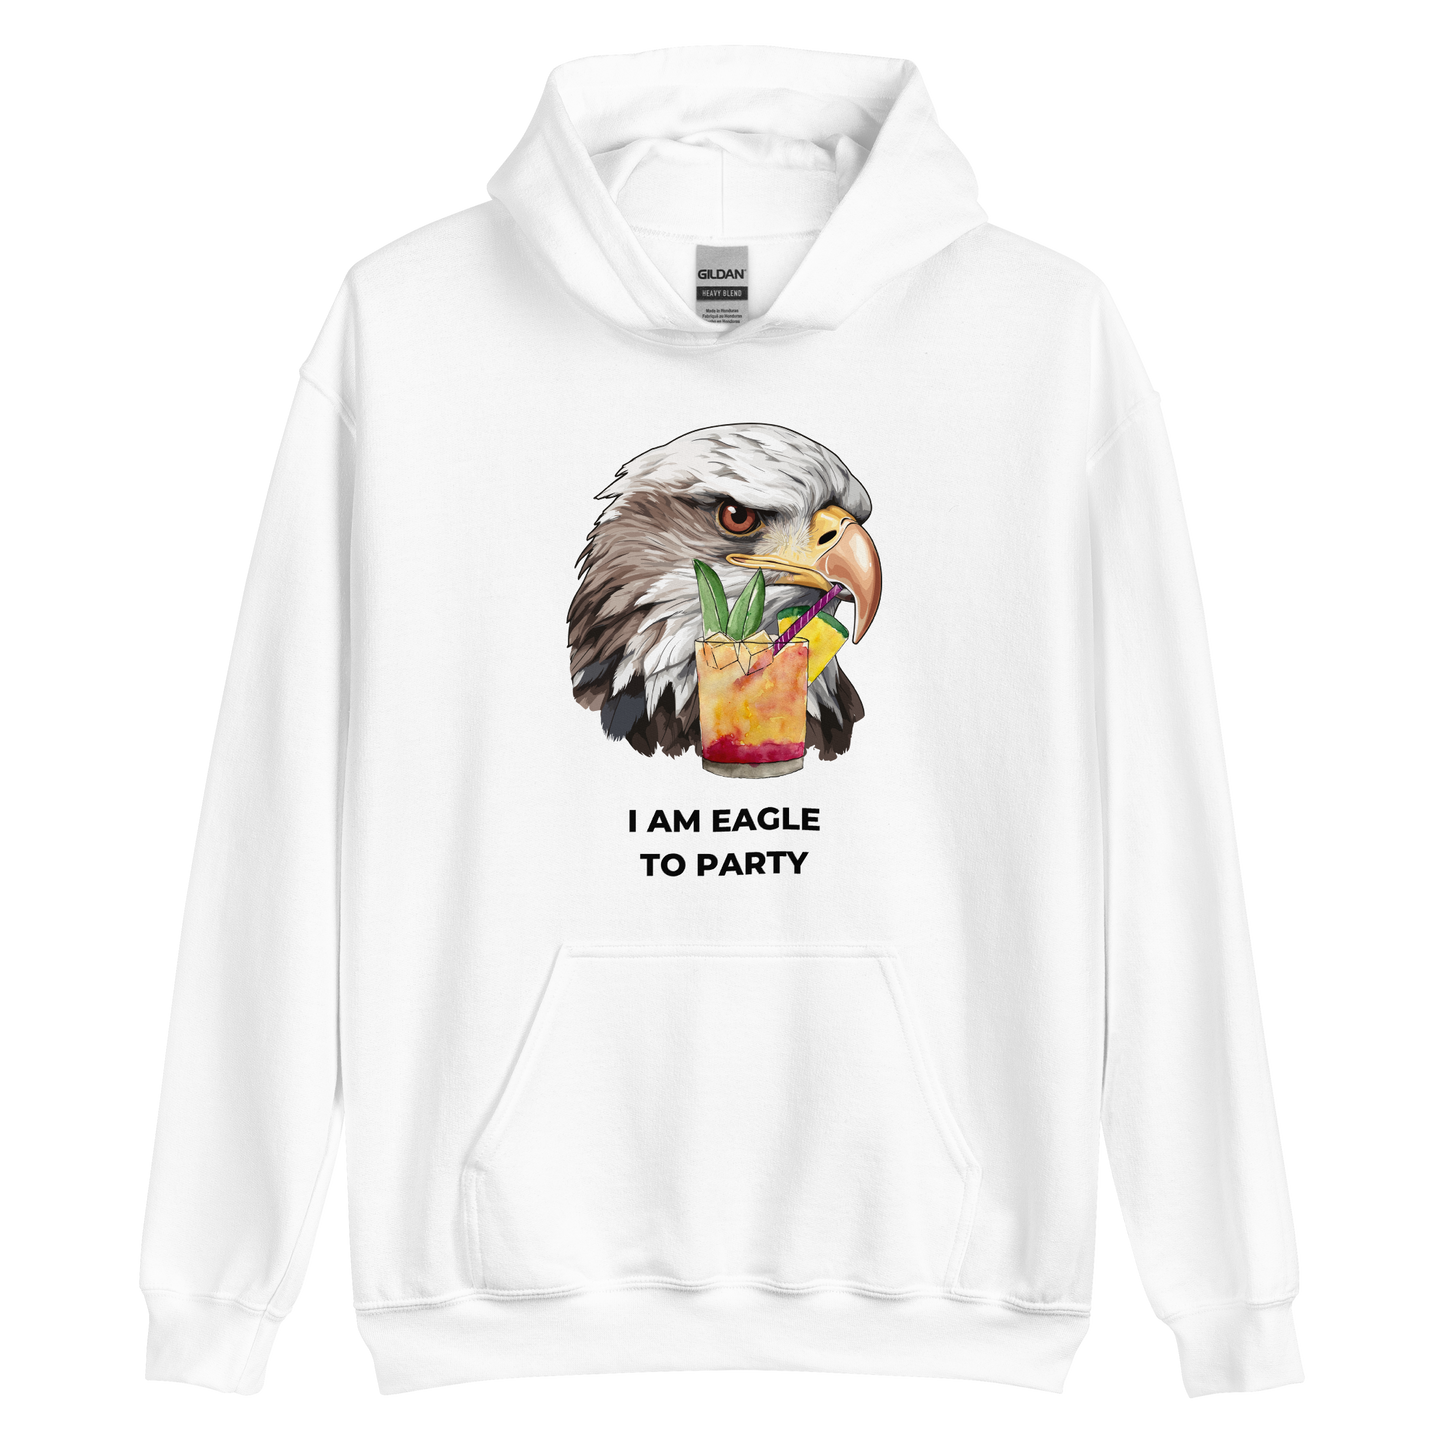 White Eagle Hoodie featuring a captivating I Am Eagle To Party graphic on the chest - Funny Graphic Eagle Party Hoodies - Boozy Fox